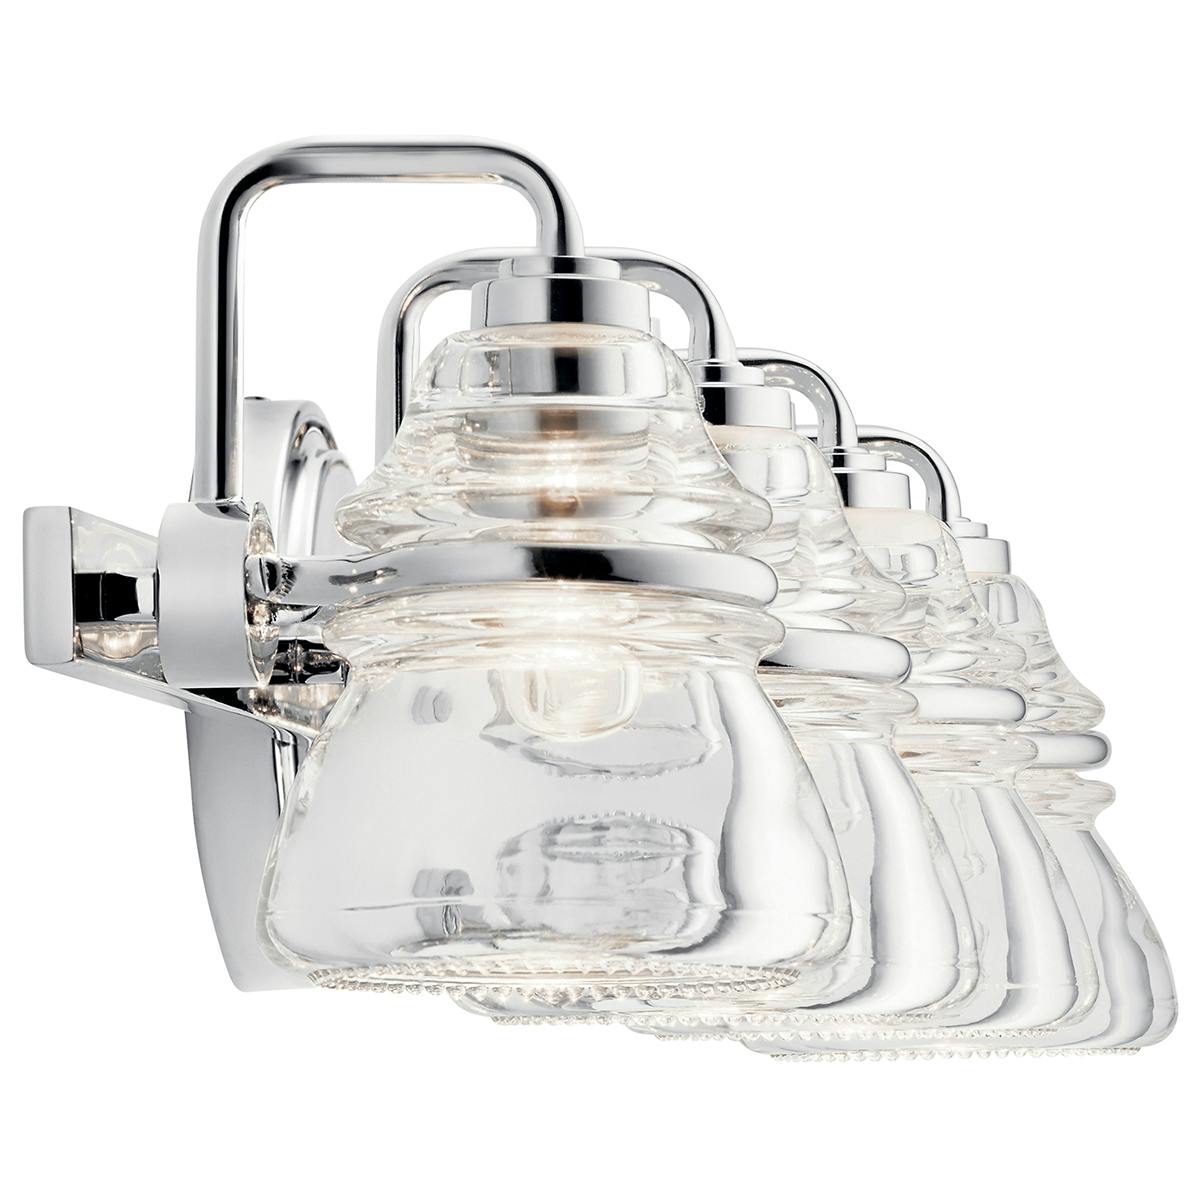 Profile view of the Talland 4 Light Vanity Light Chrome on a white background